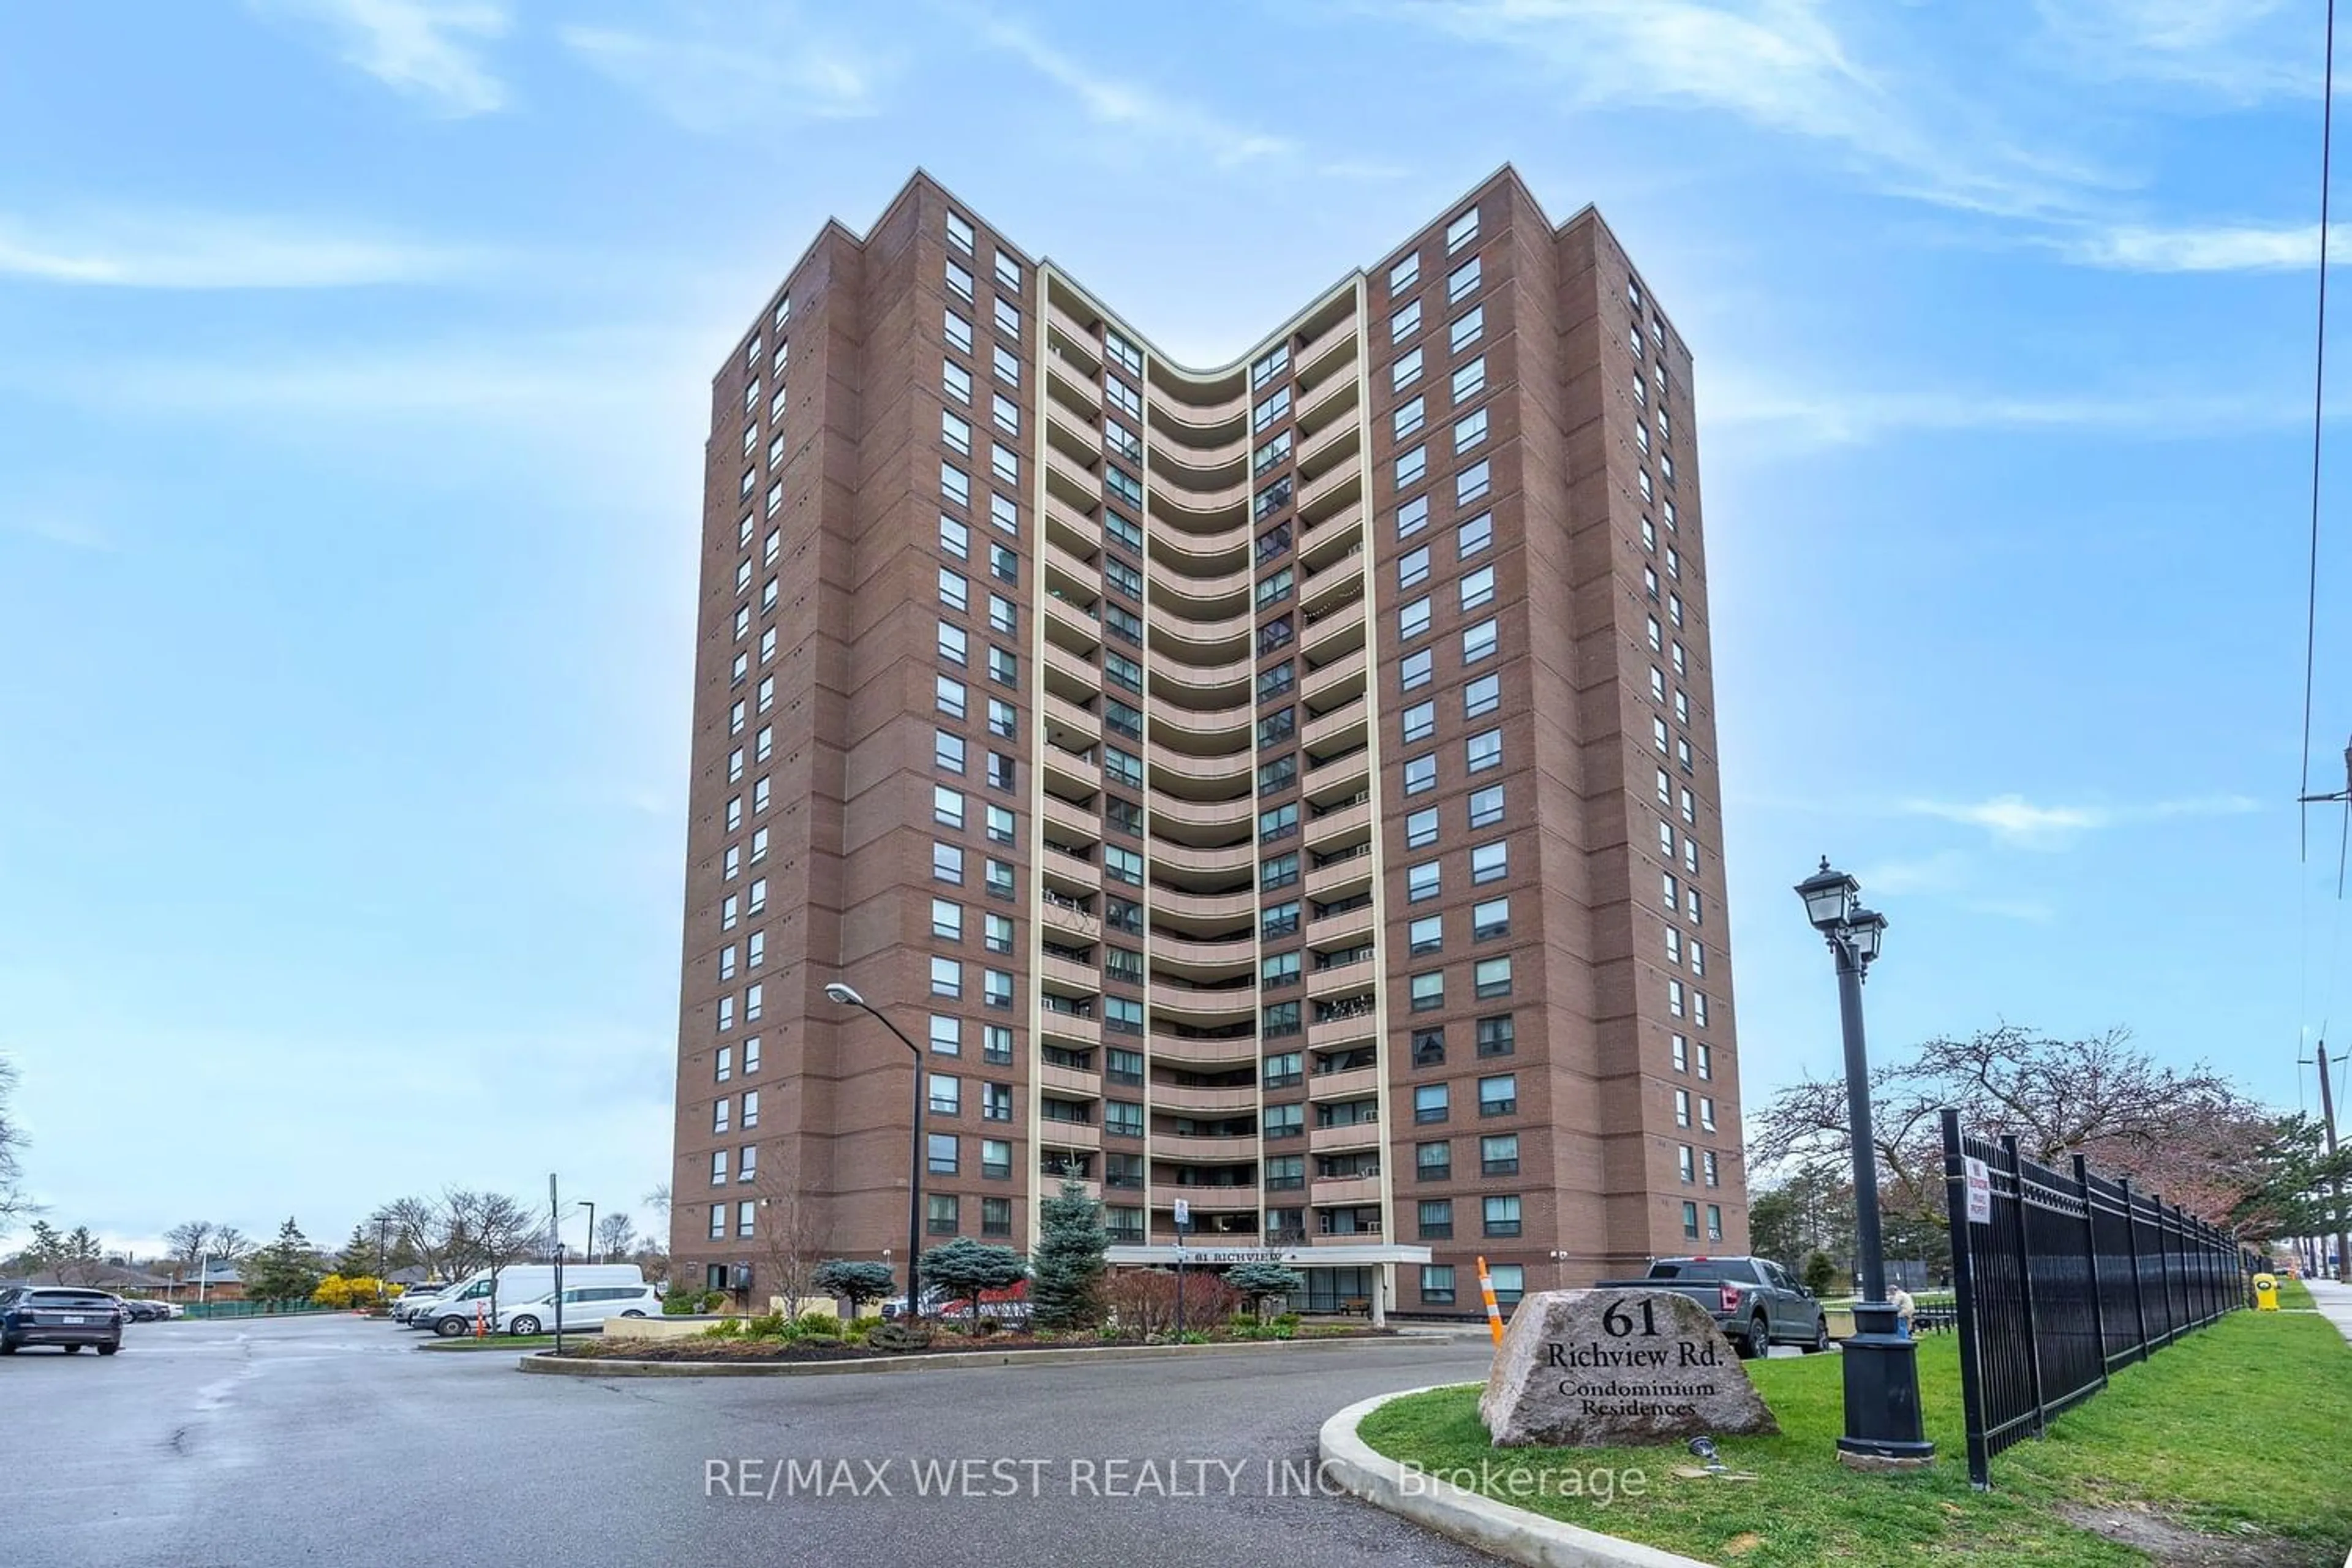 A pic from exterior of the house or condo for 61 Richview Rd #1410, Toronto Ontario M9A 4M8